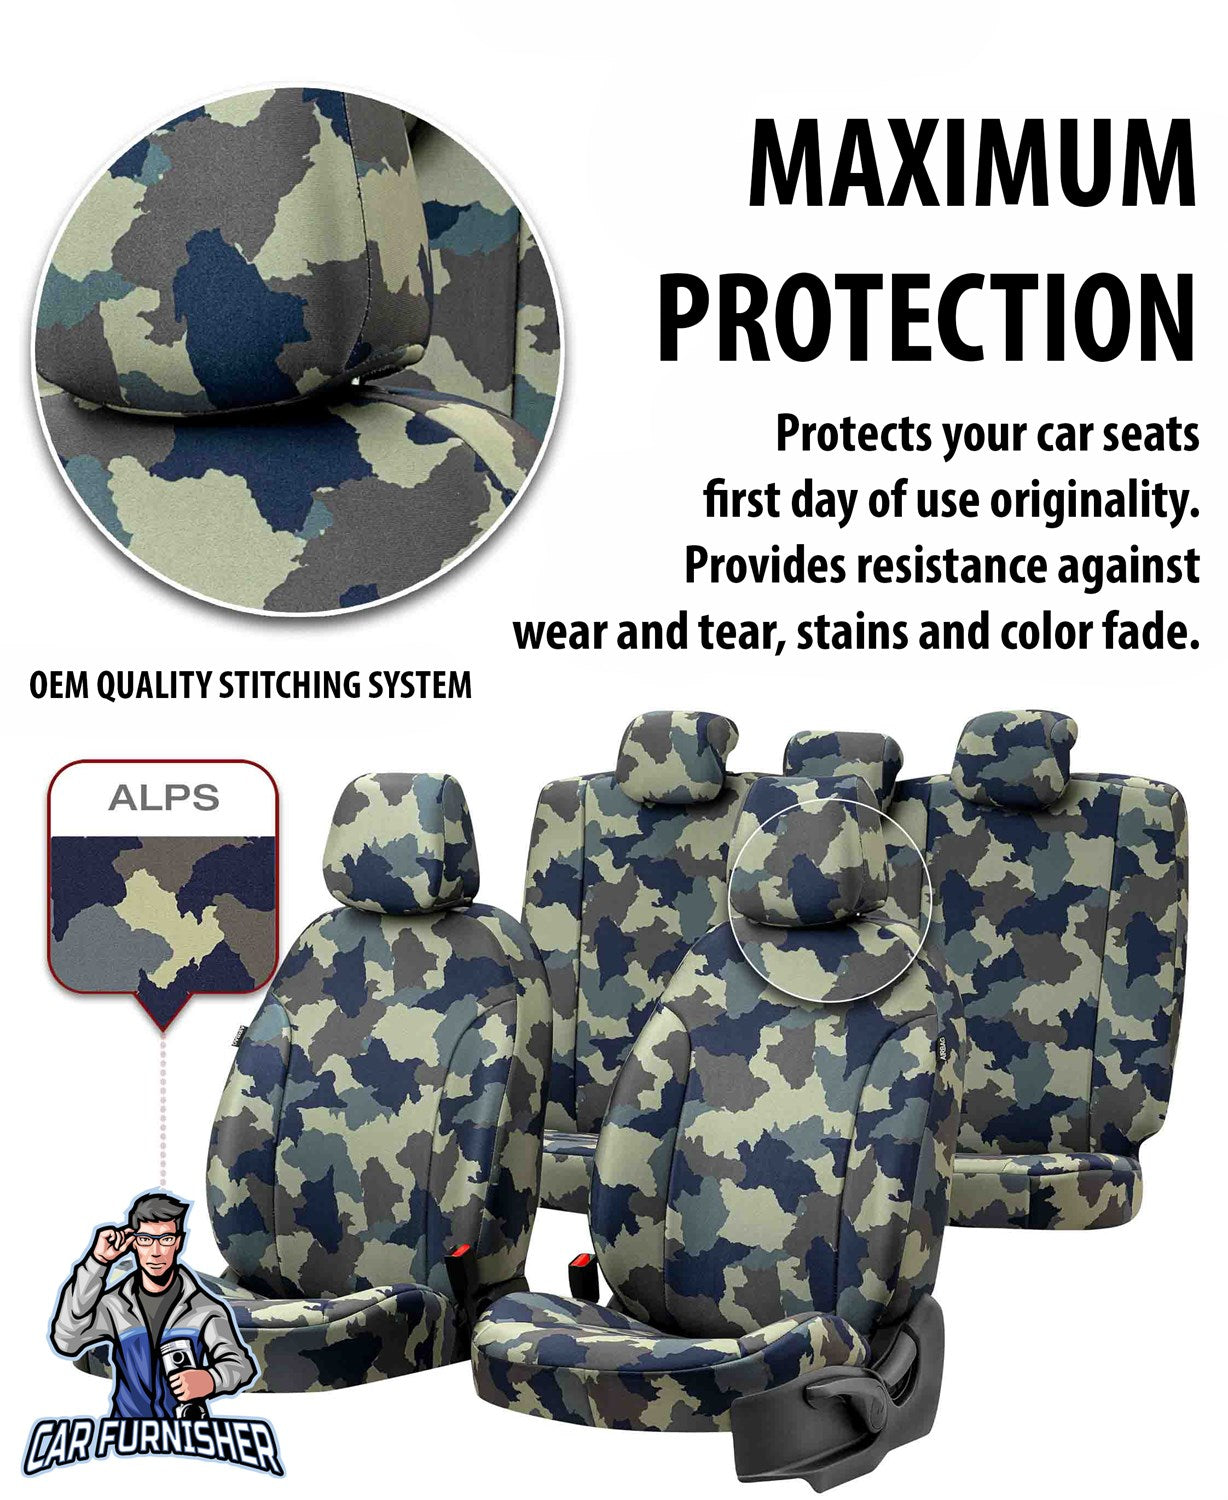 Volvo V70 Seat Cover Camouflage Waterproof Design Montblanc Camo Waterproof Fabric